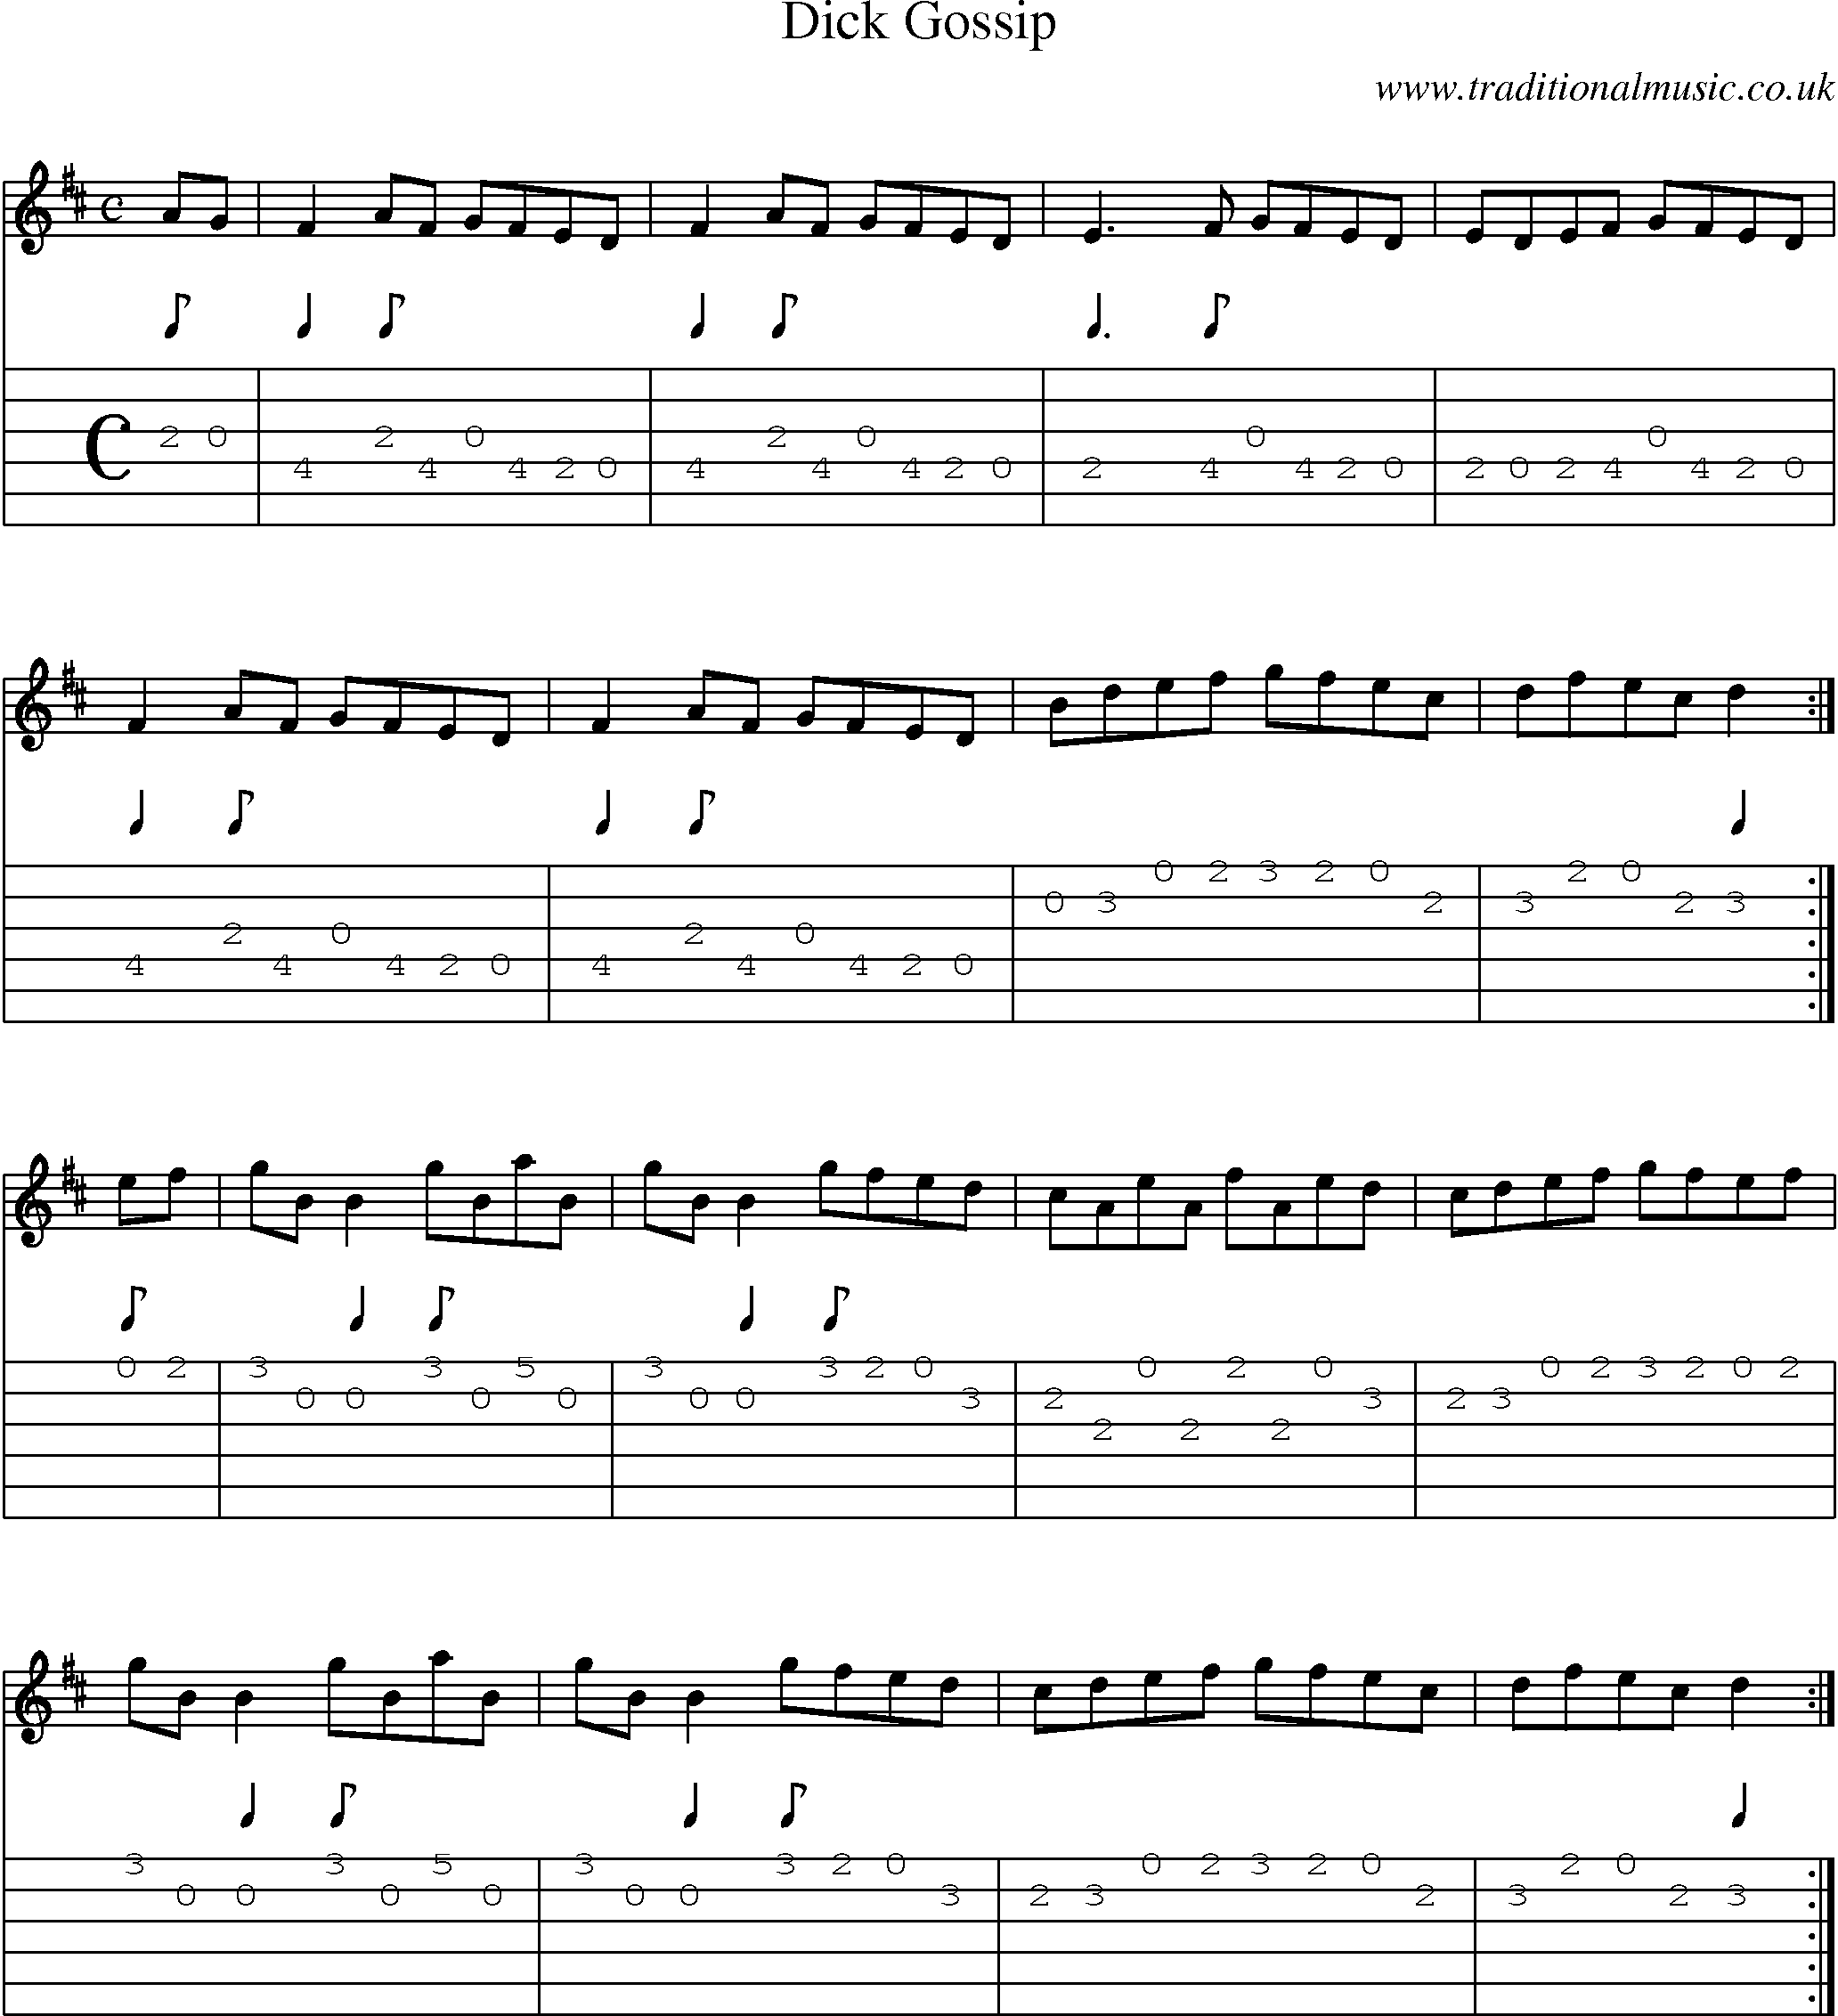 Music Score and Guitar Tabs for Dick Gossip